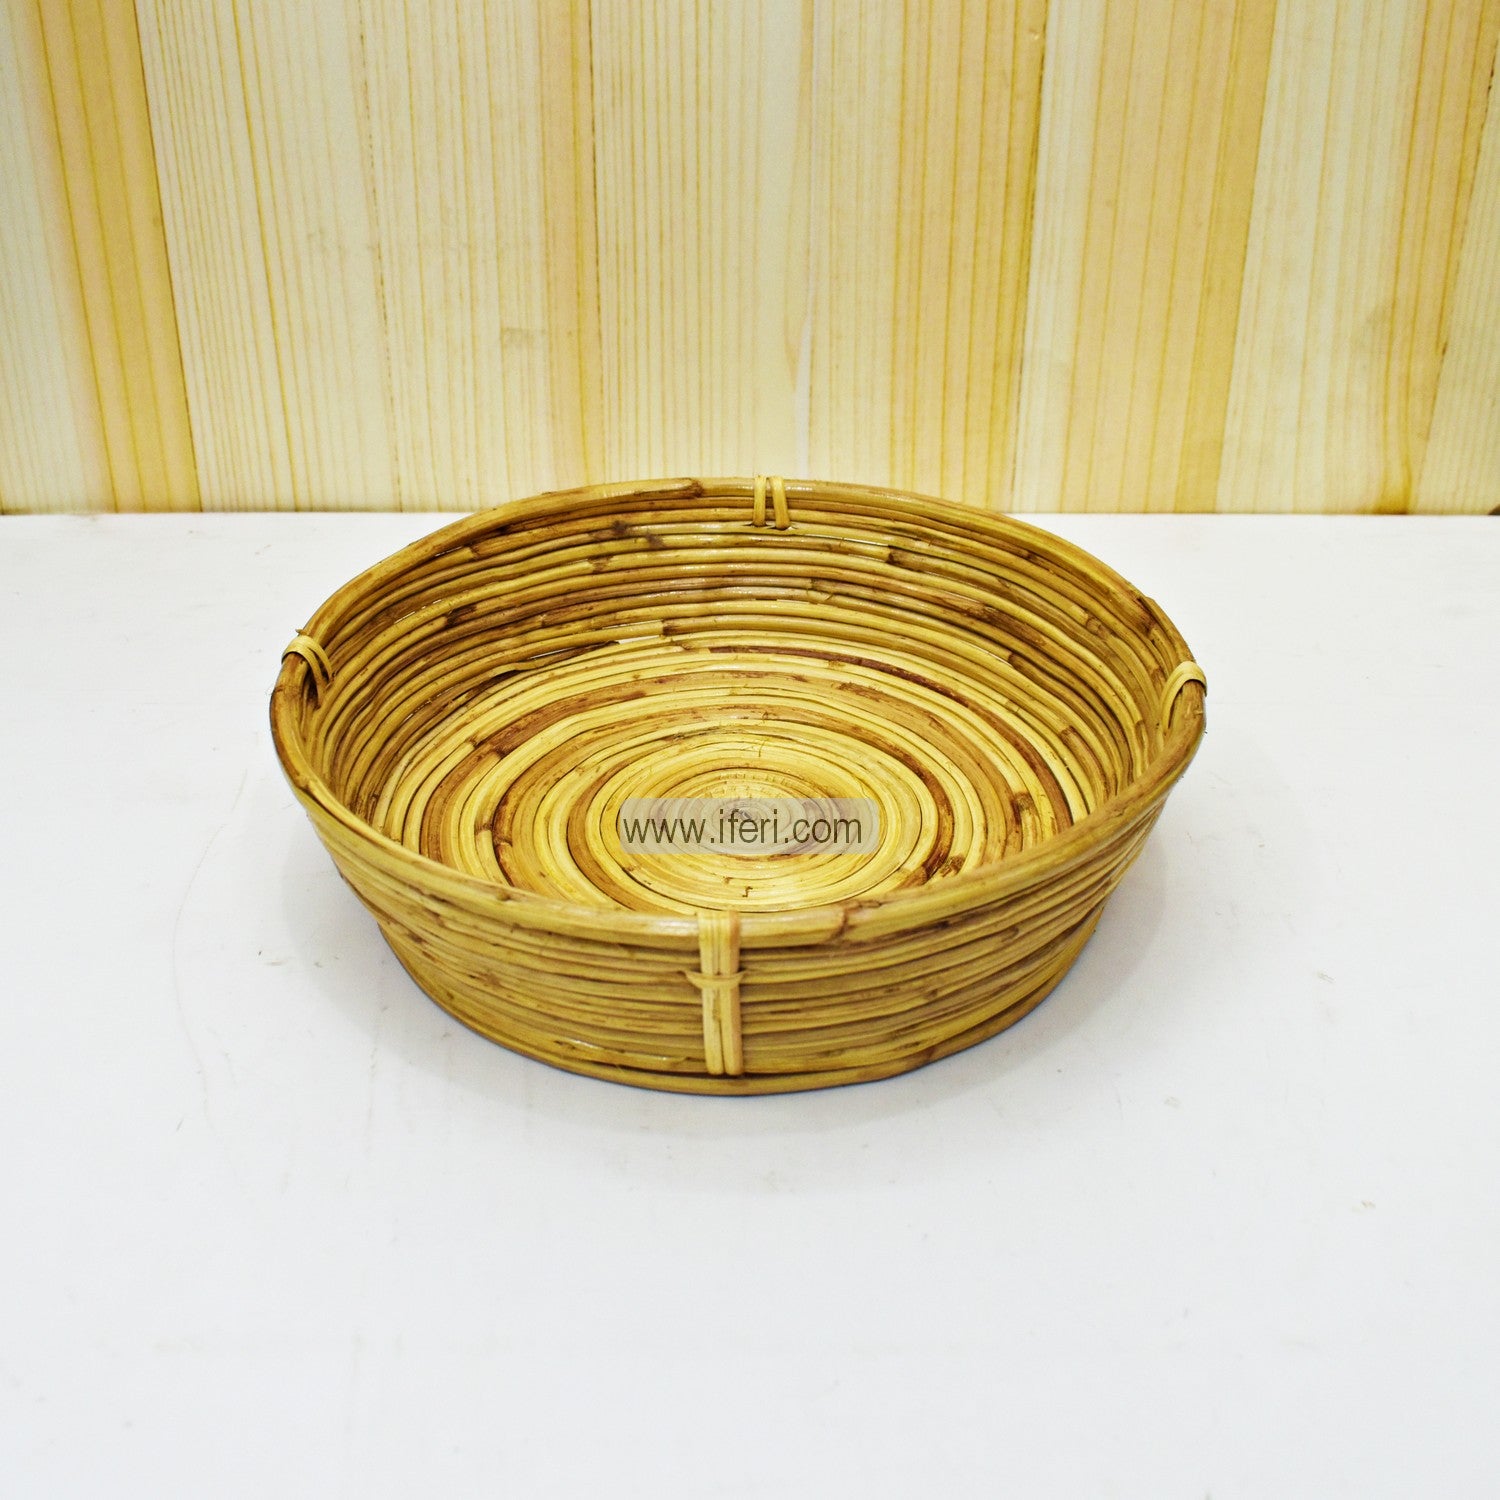 11 inch Round Bread and Roti Basket for Kitchen and Dining Serving ALF0979